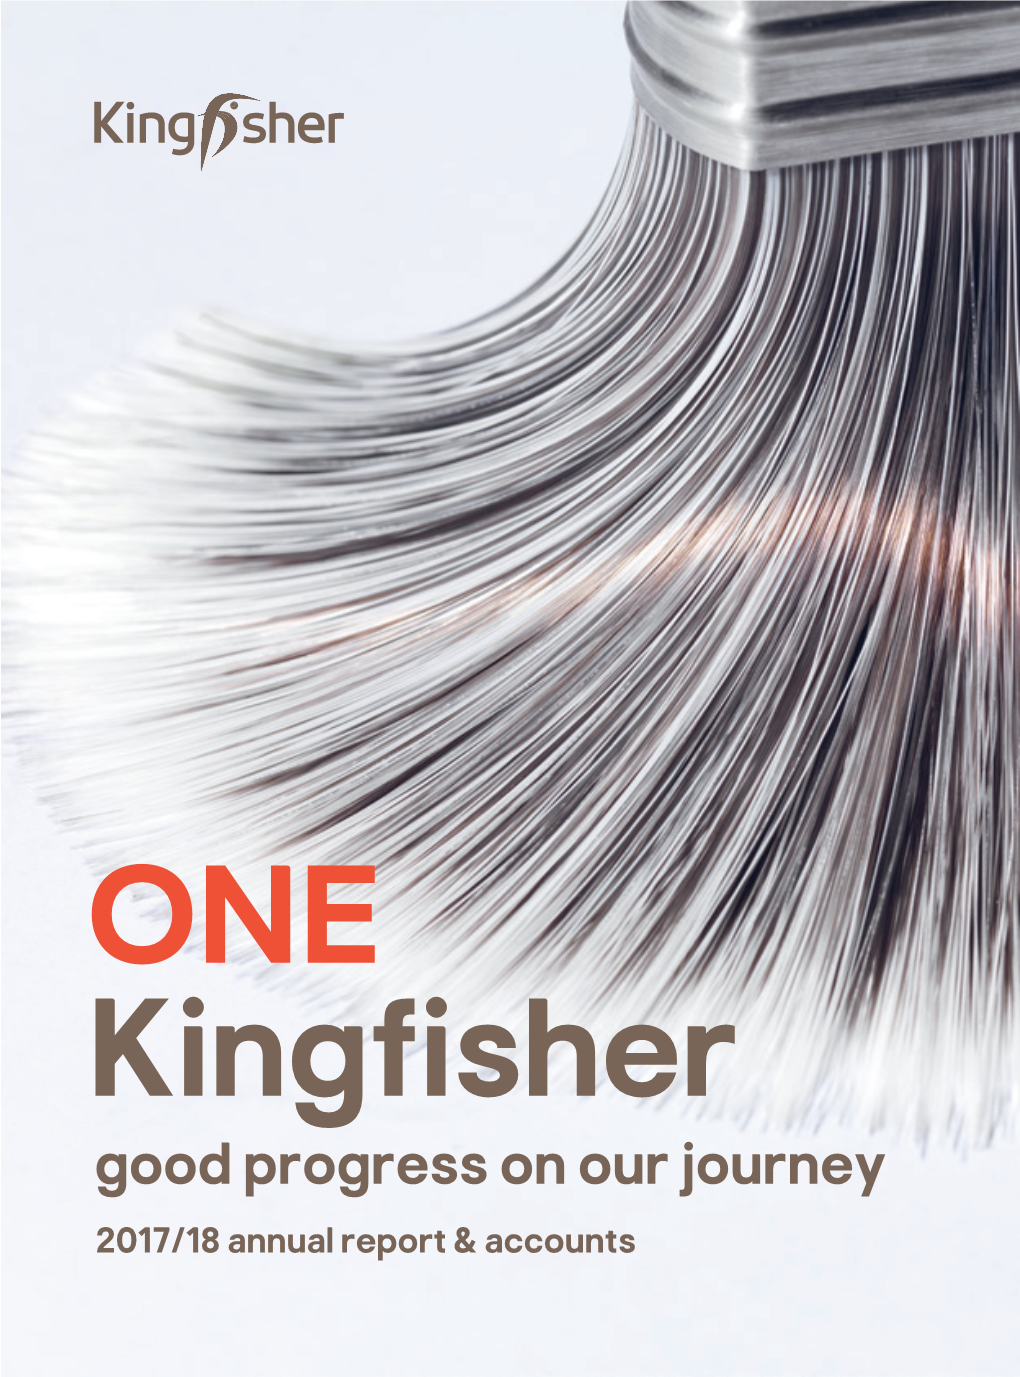 Kingfisher Annual Report 2017-18